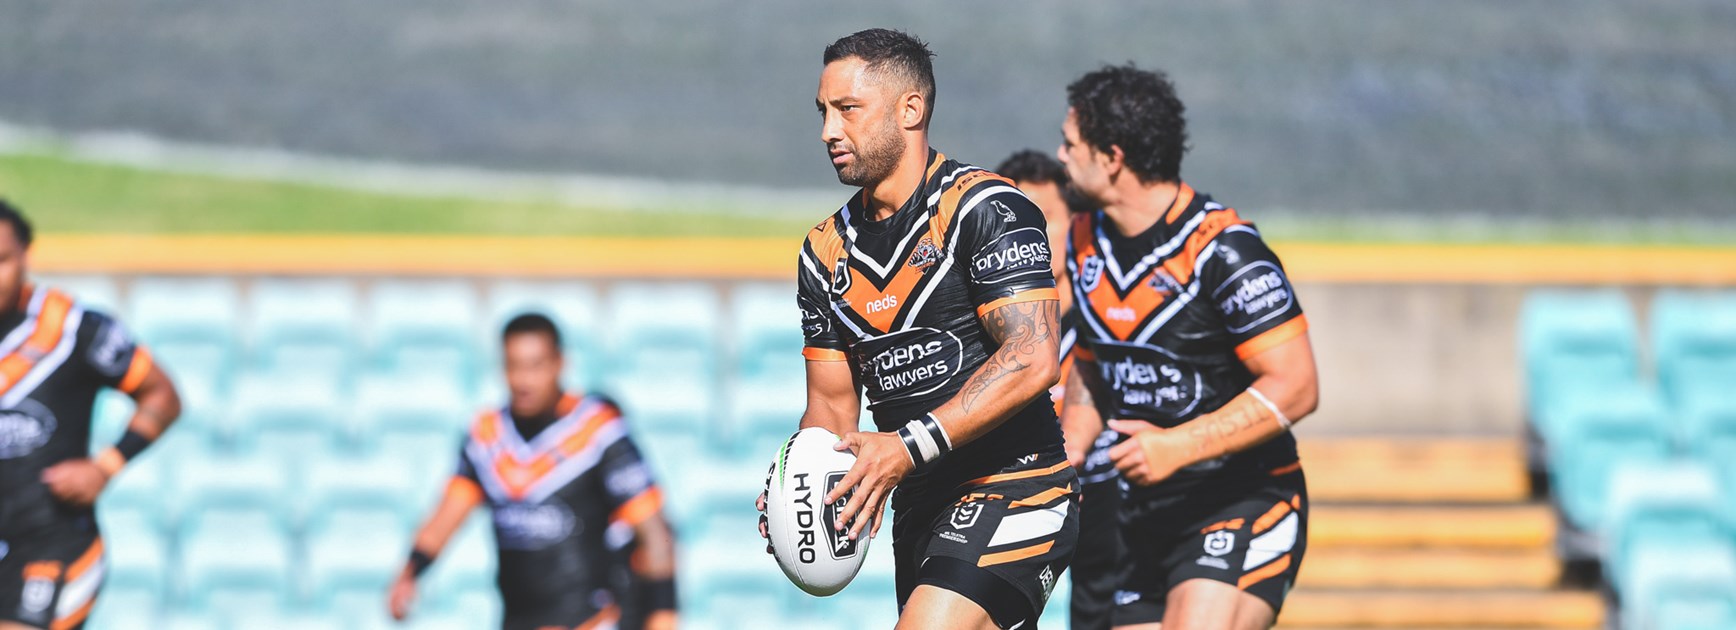 Knights triumph over Wests Tigers in free-flowing match